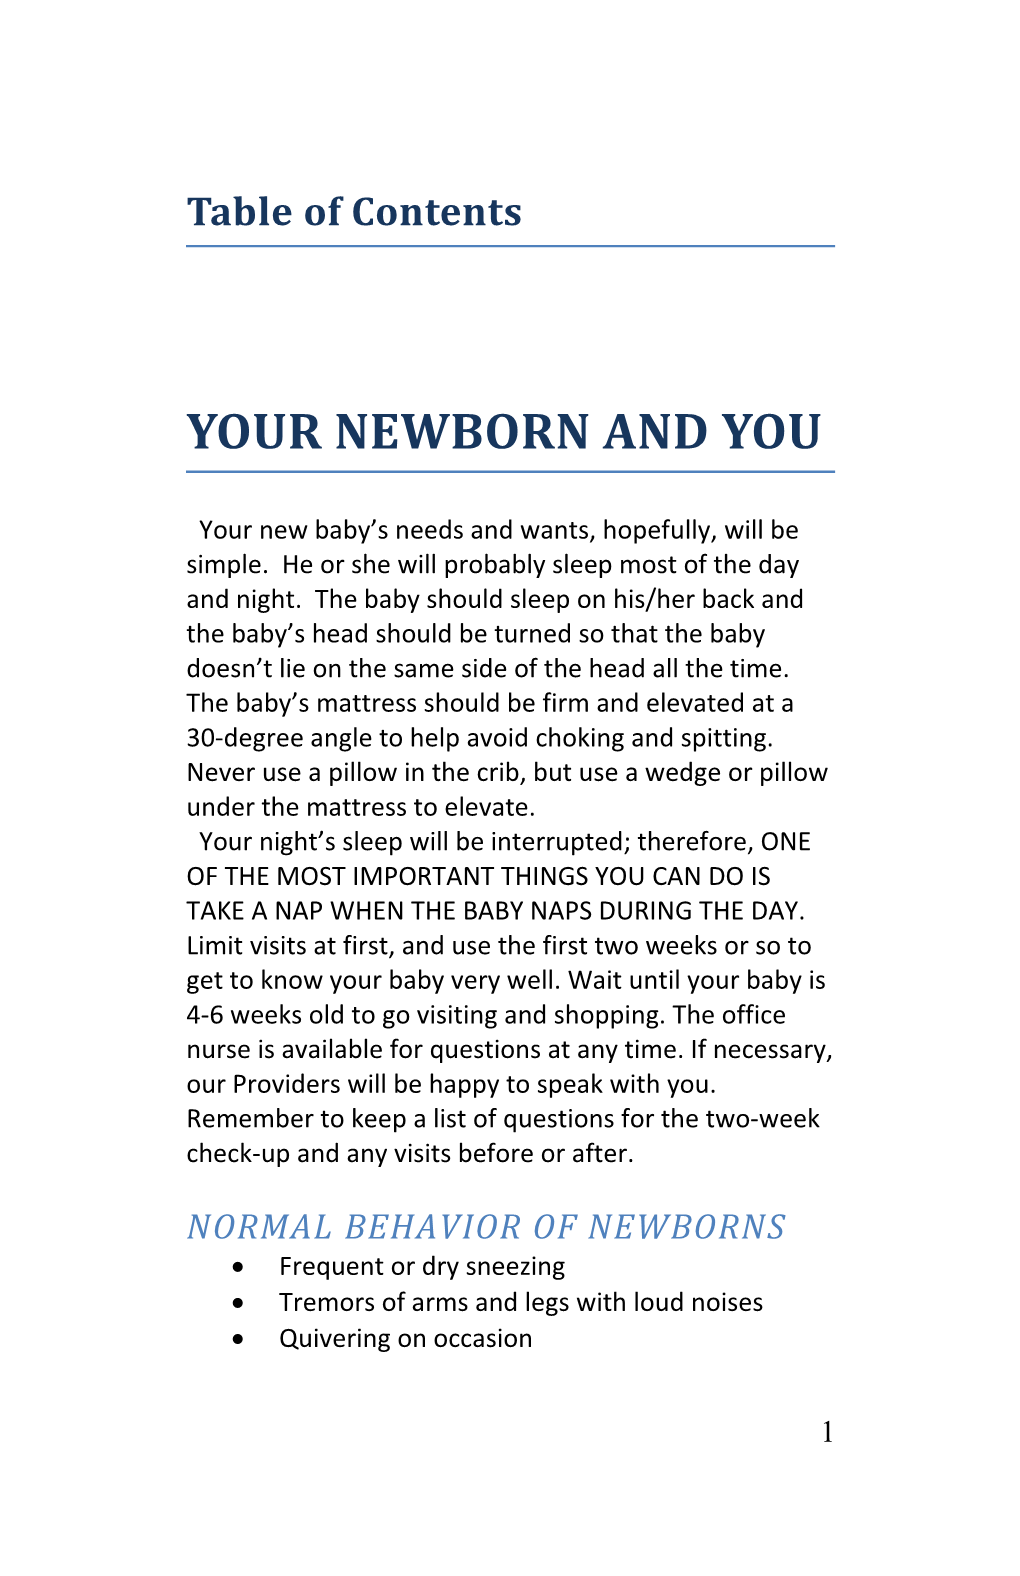 Your Newborn and You